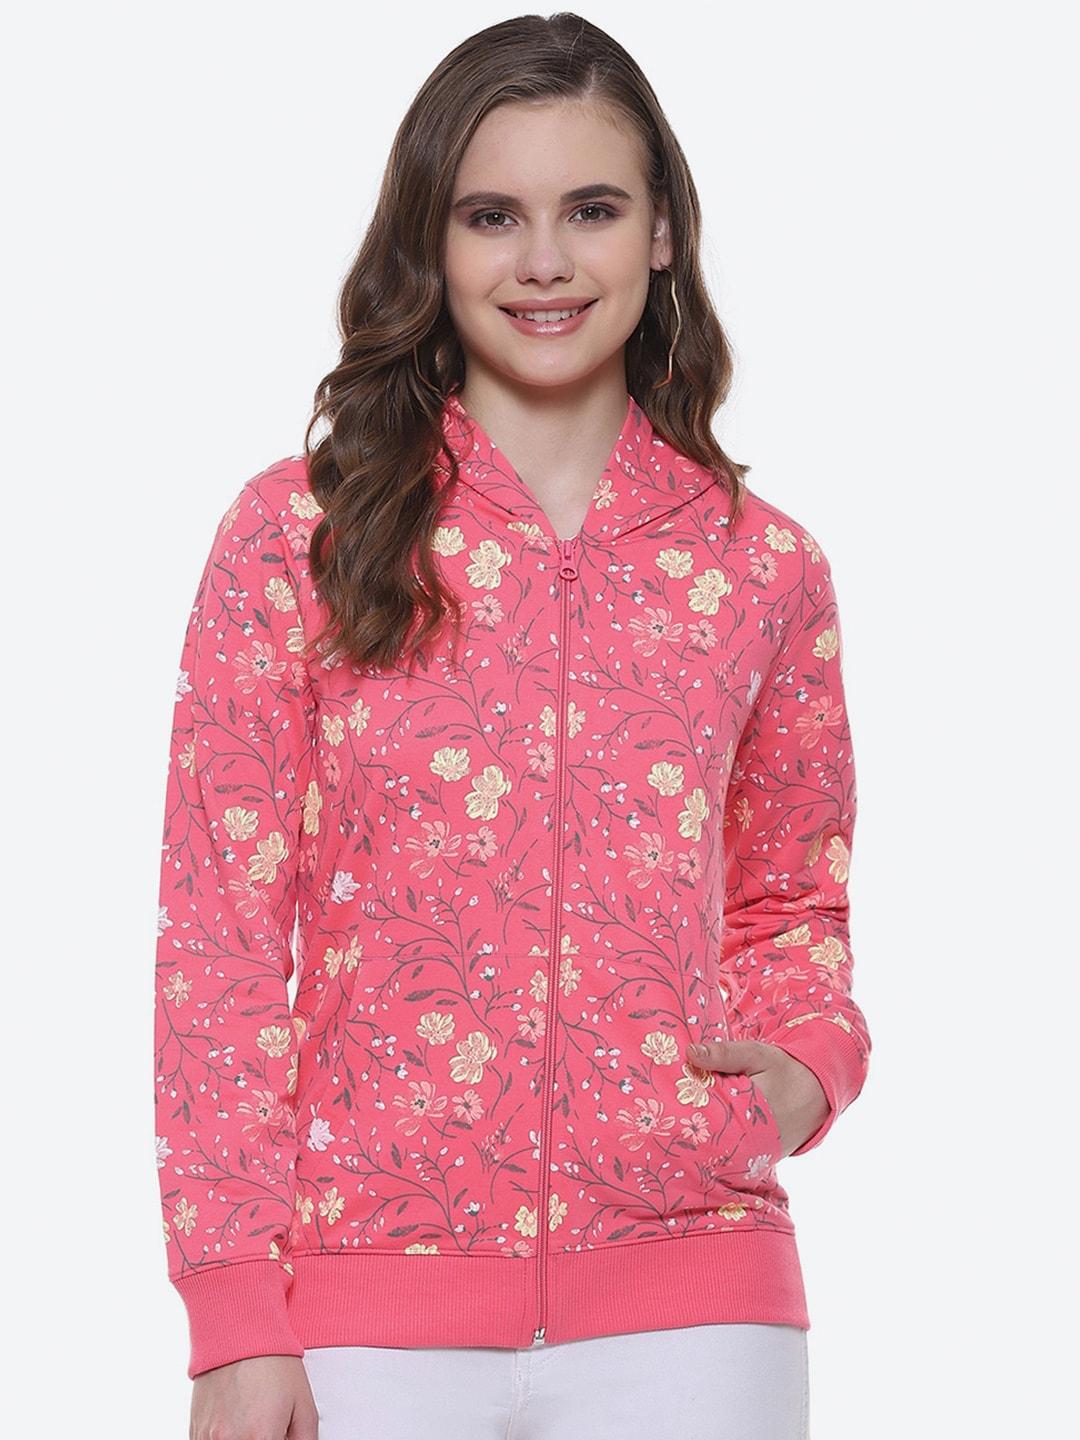 2Bme Floral Printed Cotton Hooded Front-Open Sweatshirt